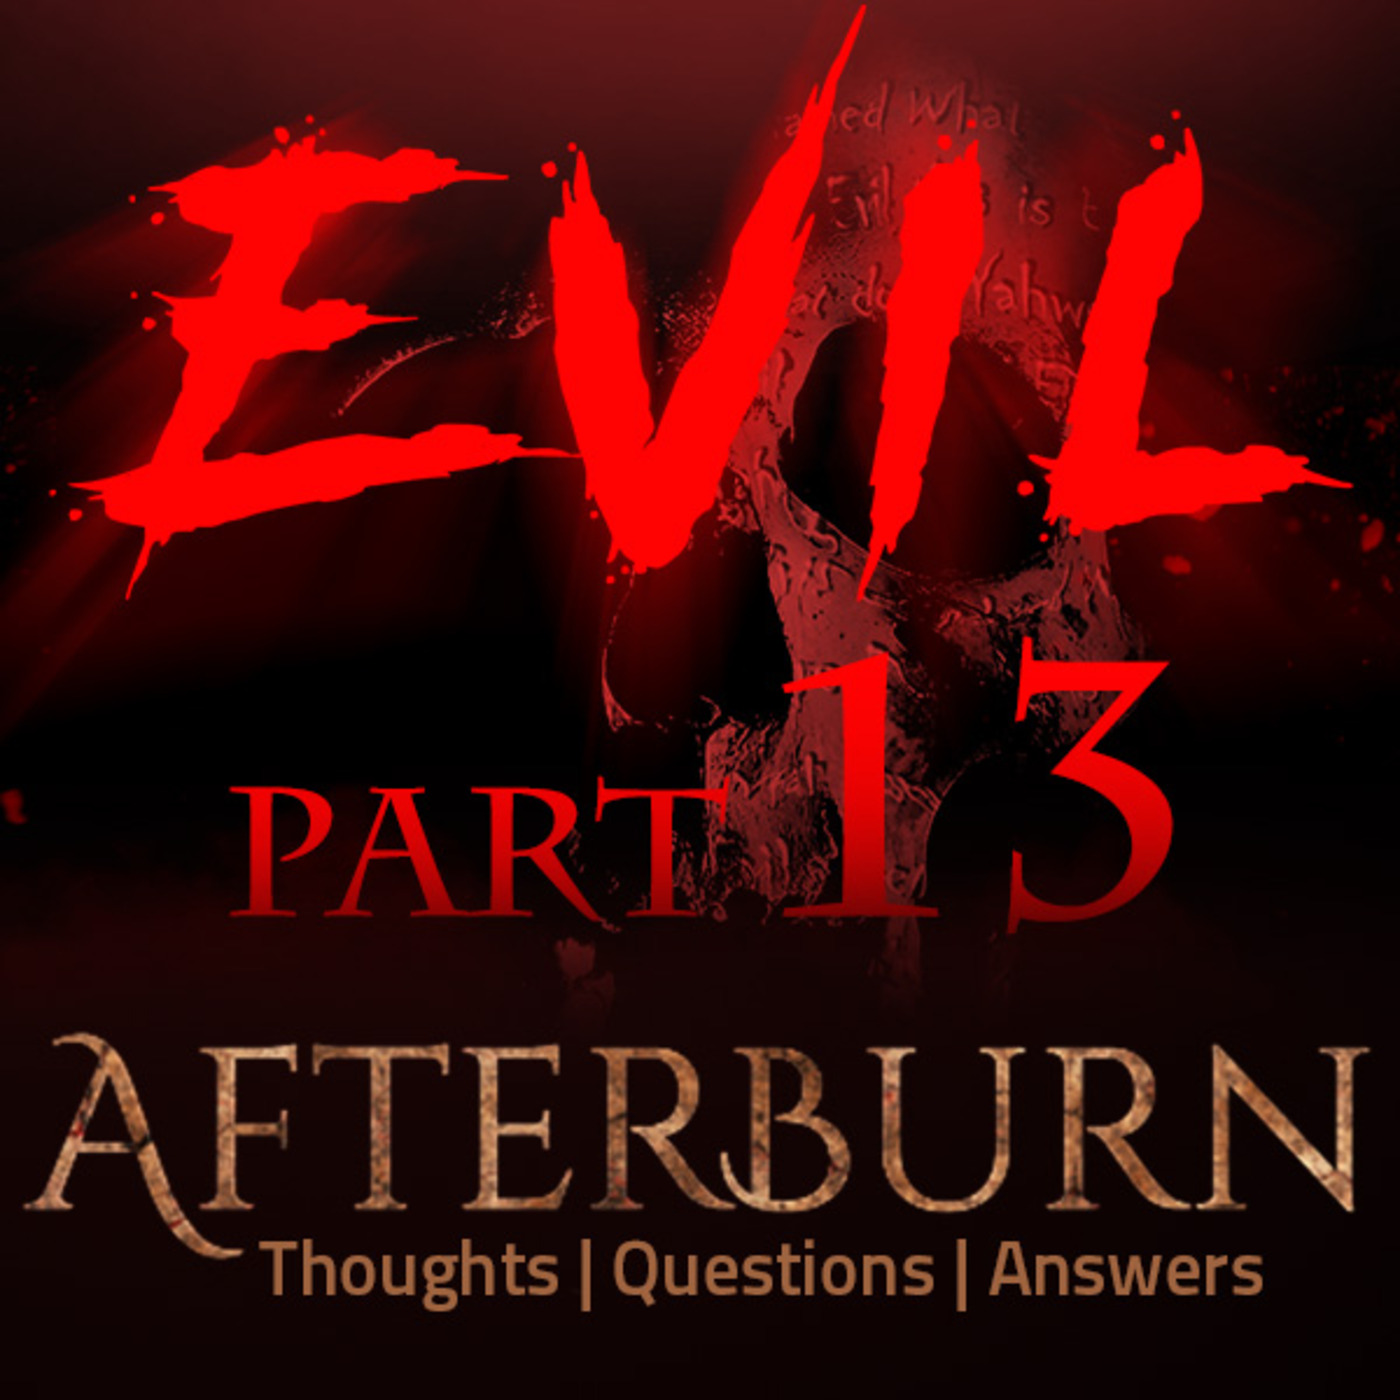 Episode 736: Afterburn | Thoughts, Q&A on Evil | Part 13